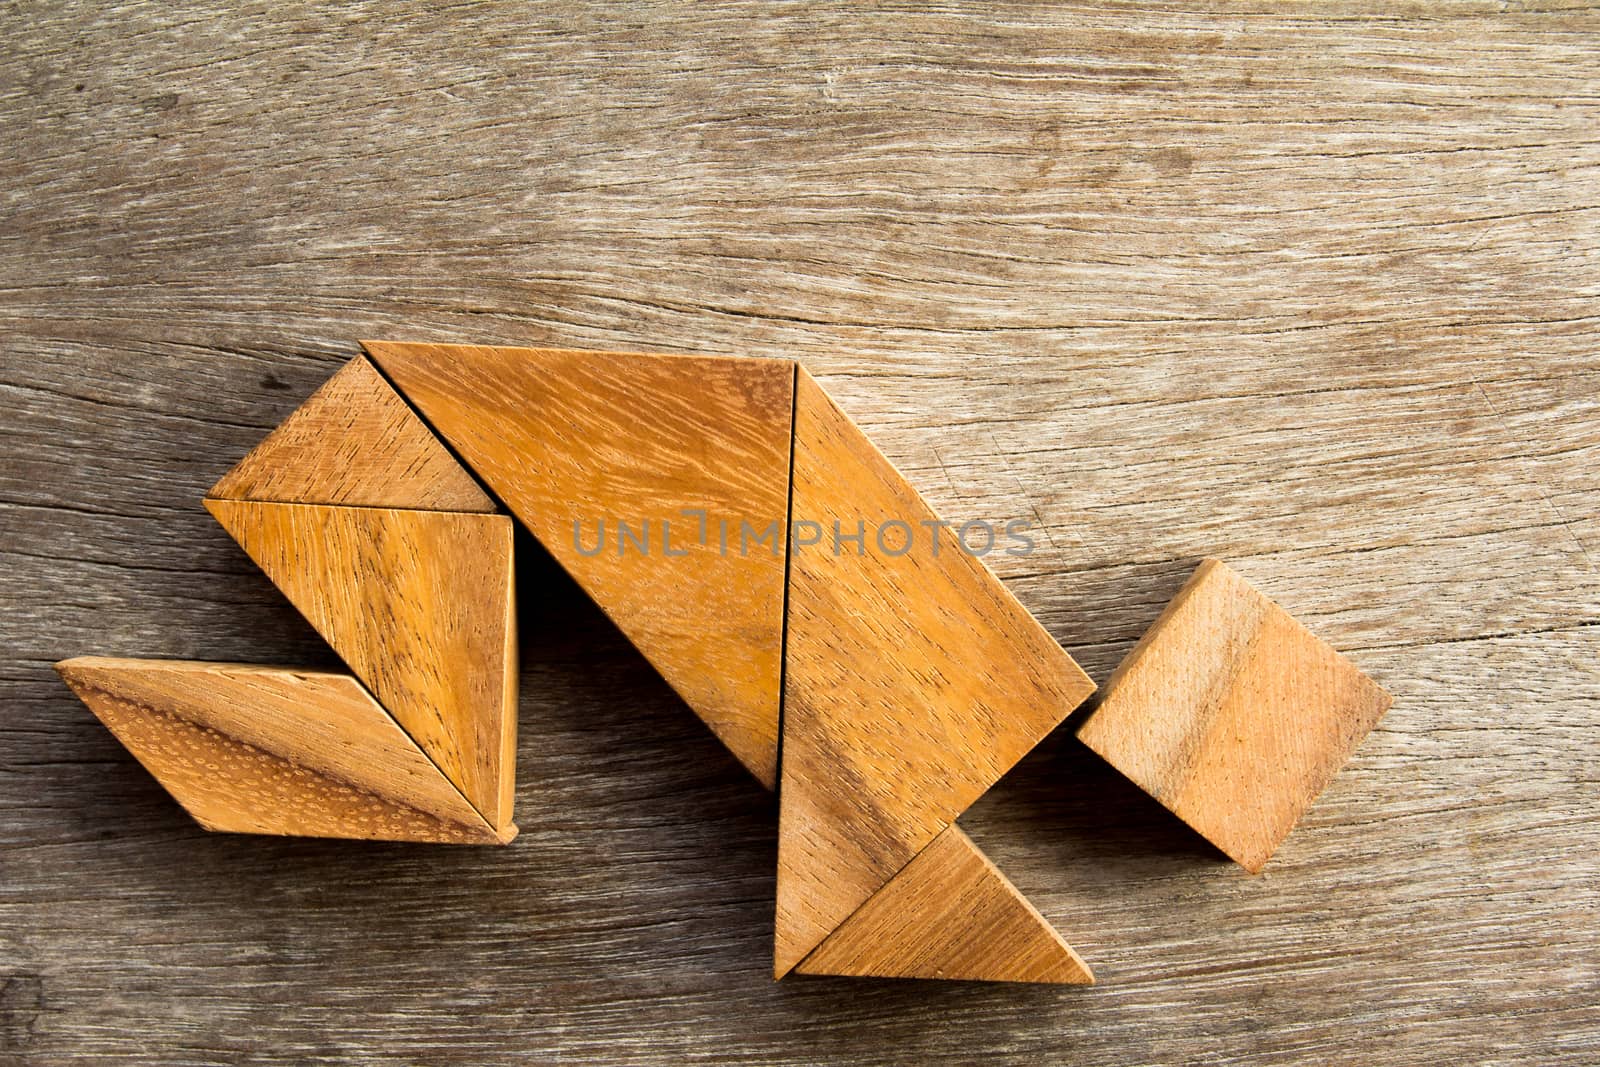 Wooden tangram puzzel in man crouch shape background